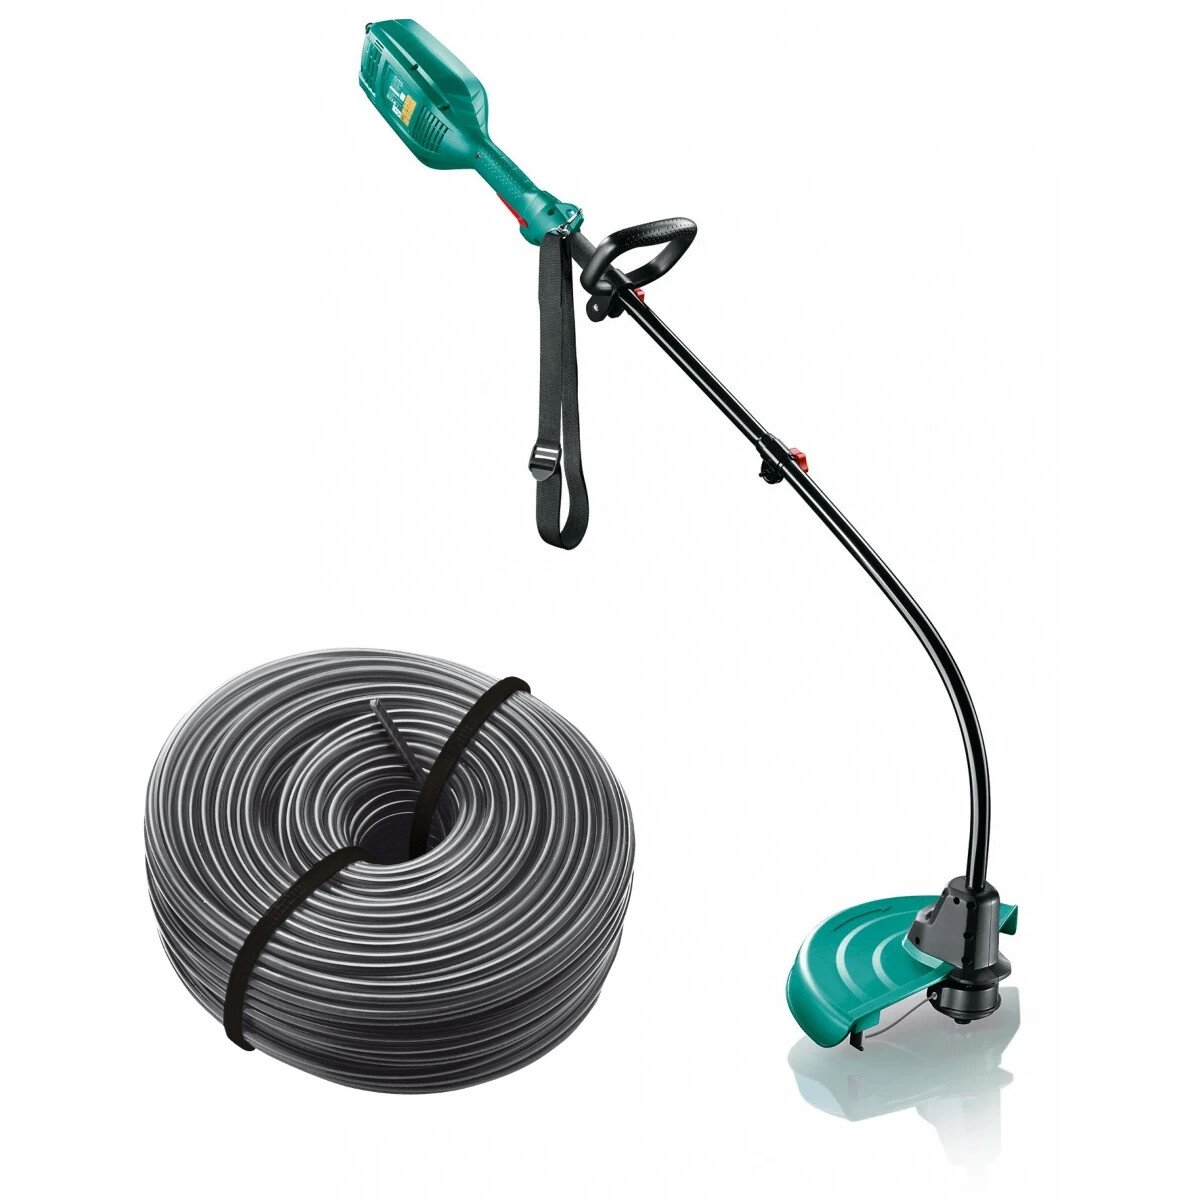 Bosch ART 35 600W 35CM Electric Grass Trimmer with Spare Line